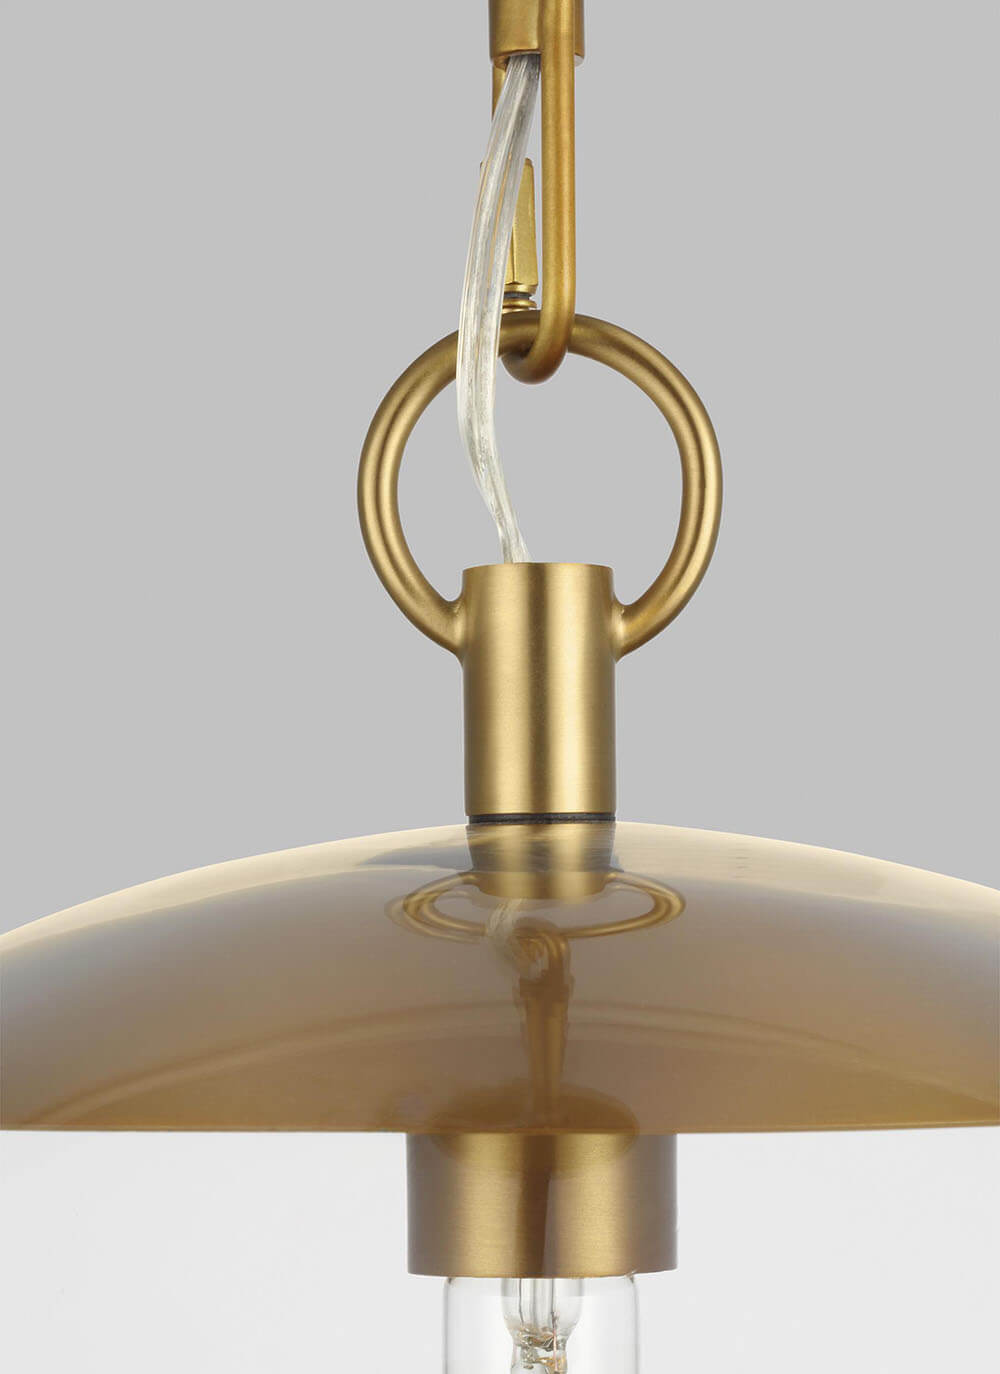 Ring attachment detail on the burnished brass Augusta 1 Light Pendant.